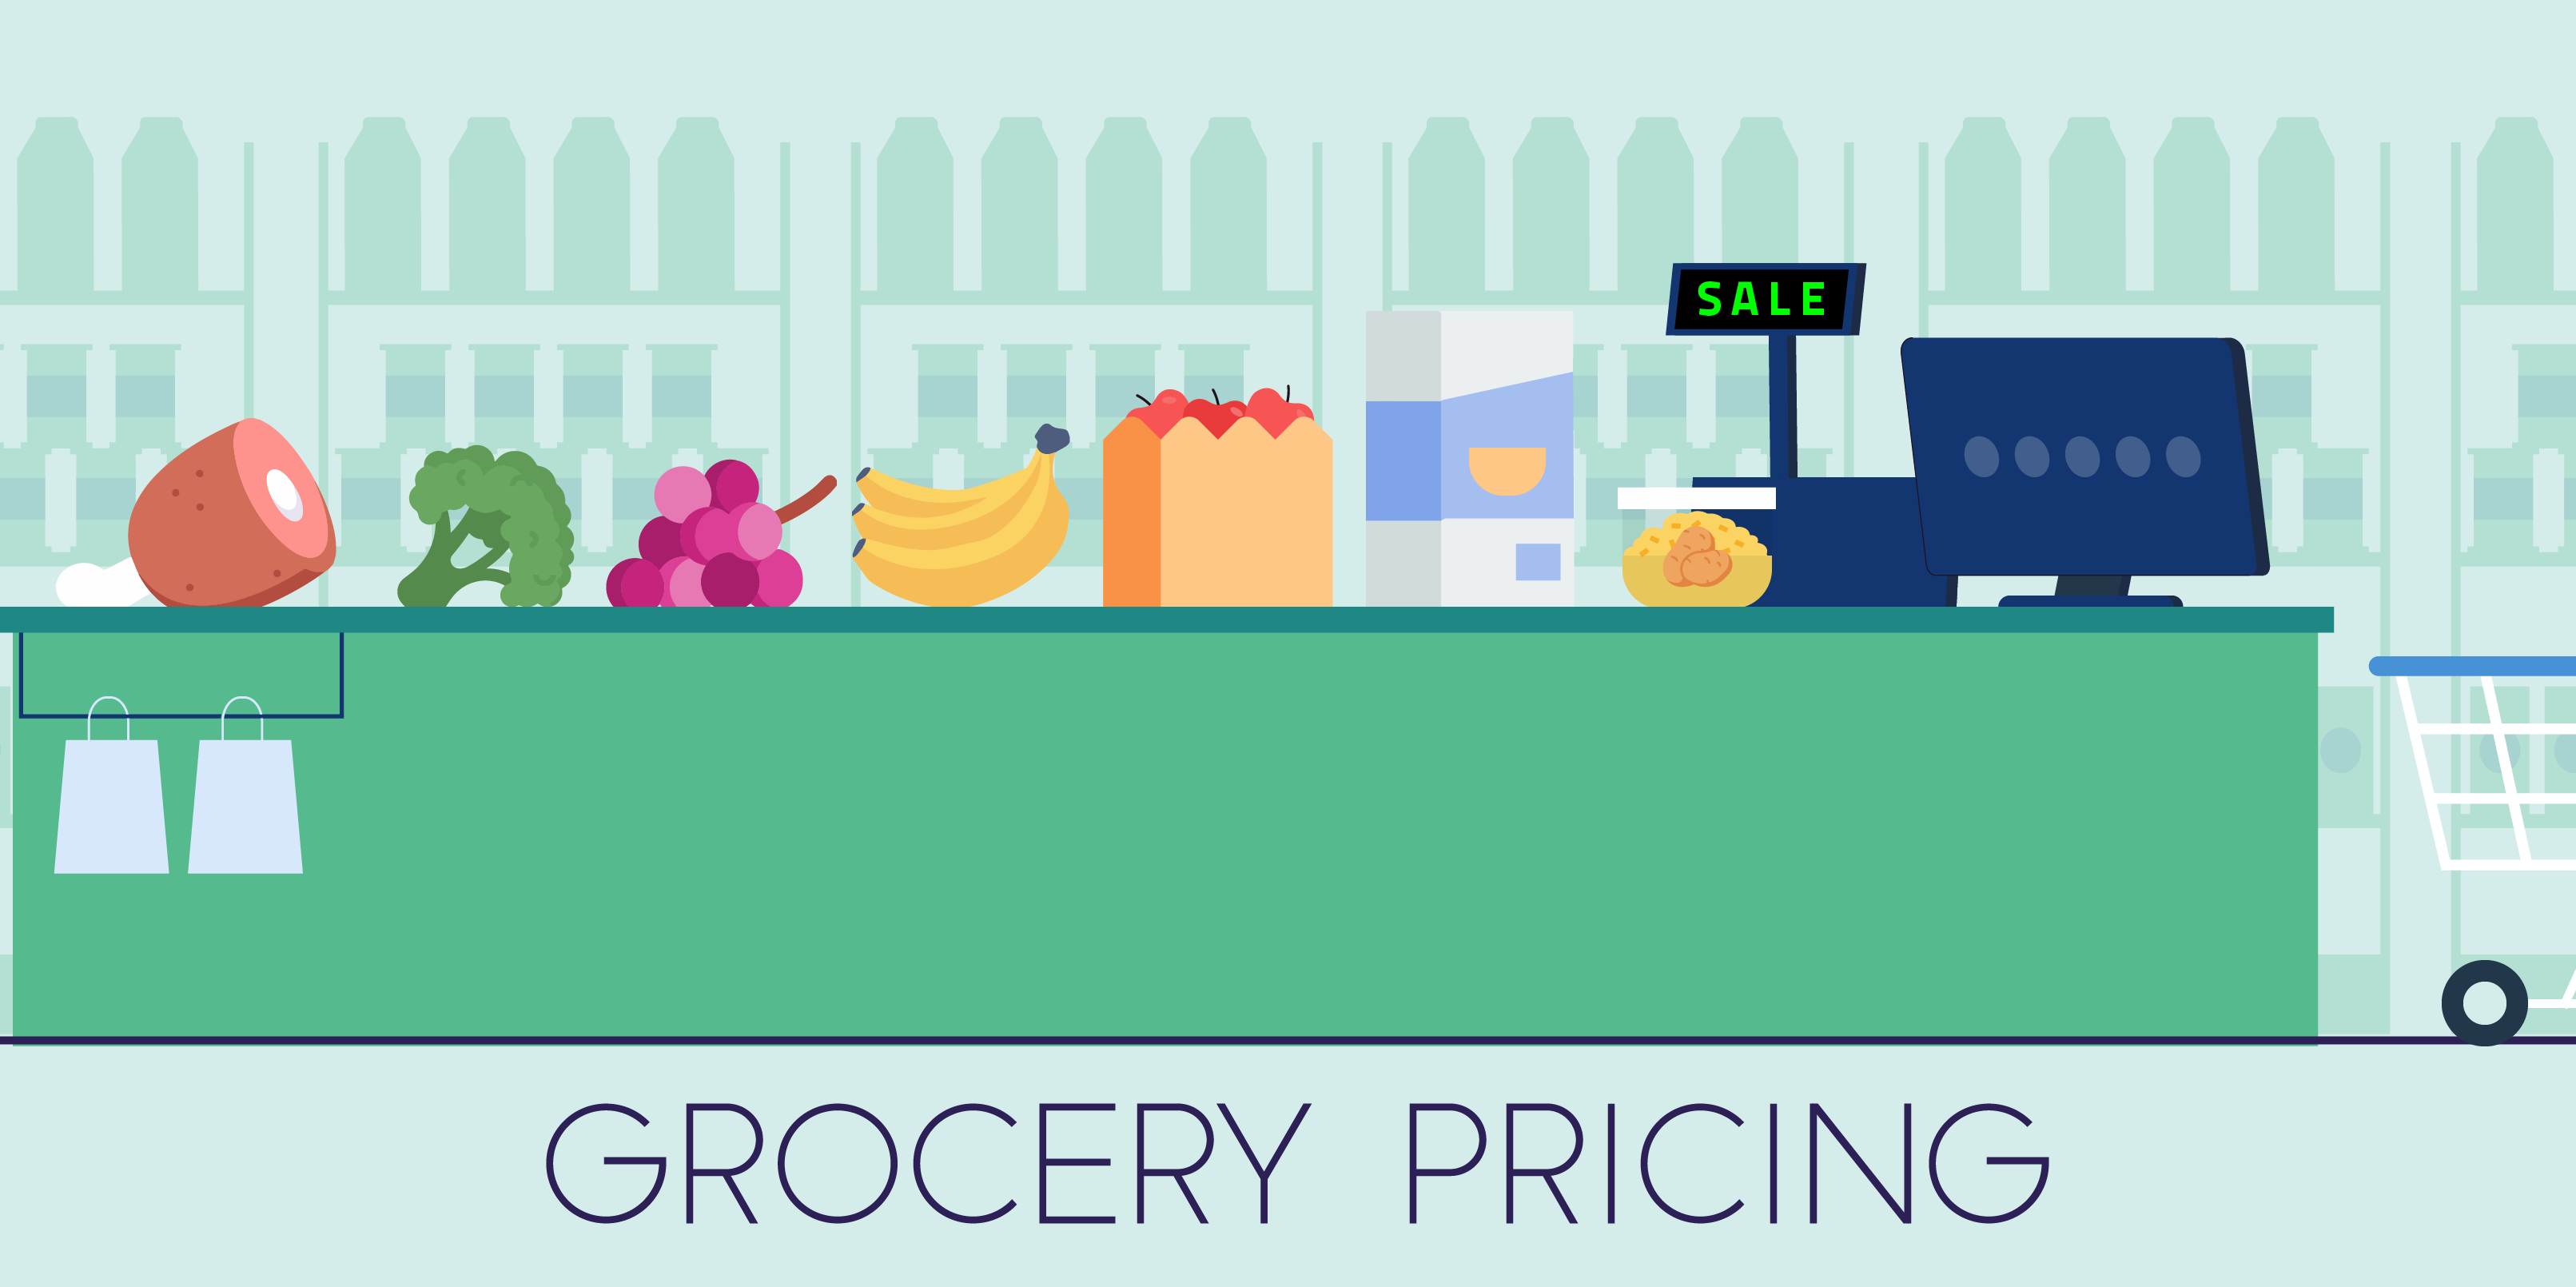 Illustration shows grocery items like meat, broccoli and bananas on the checkout counter with the words "Grocery Pricing."